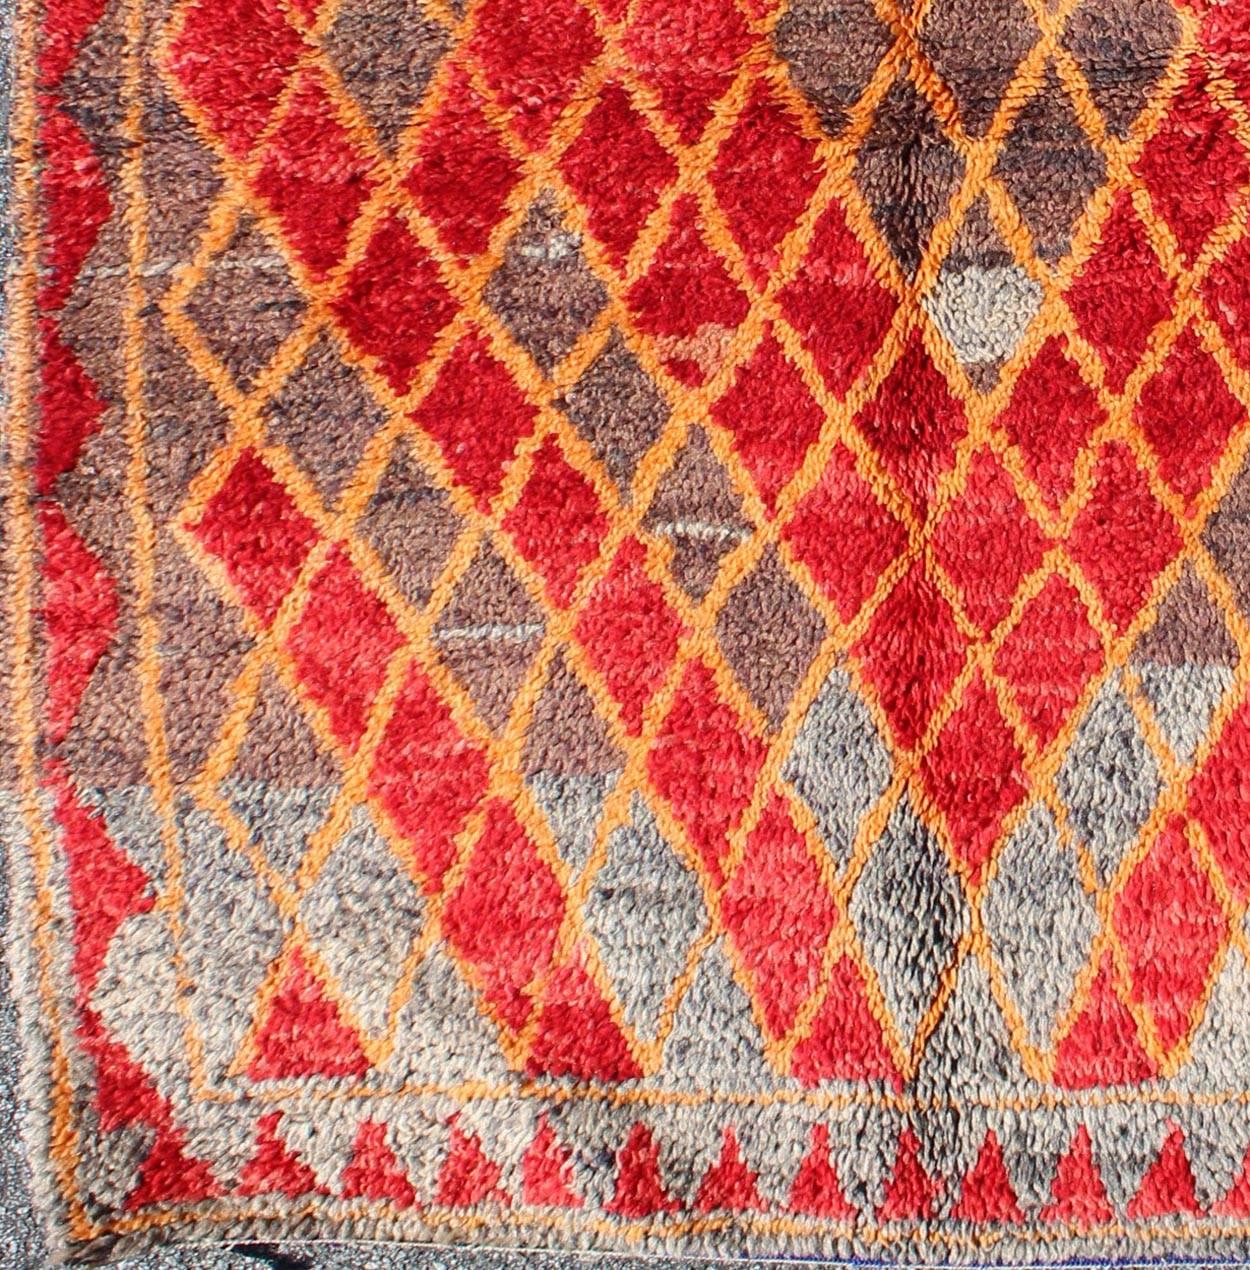 Midcentury Moroccan rug with orange, red, brown diamonds and blue fringe detail. Keivan Woven Arts /  rug sk-628, country of origin / type: Morocco / Tribal, circa mid-20th century

This wonderful vintage Moroccan rug (circa mid-20th century)